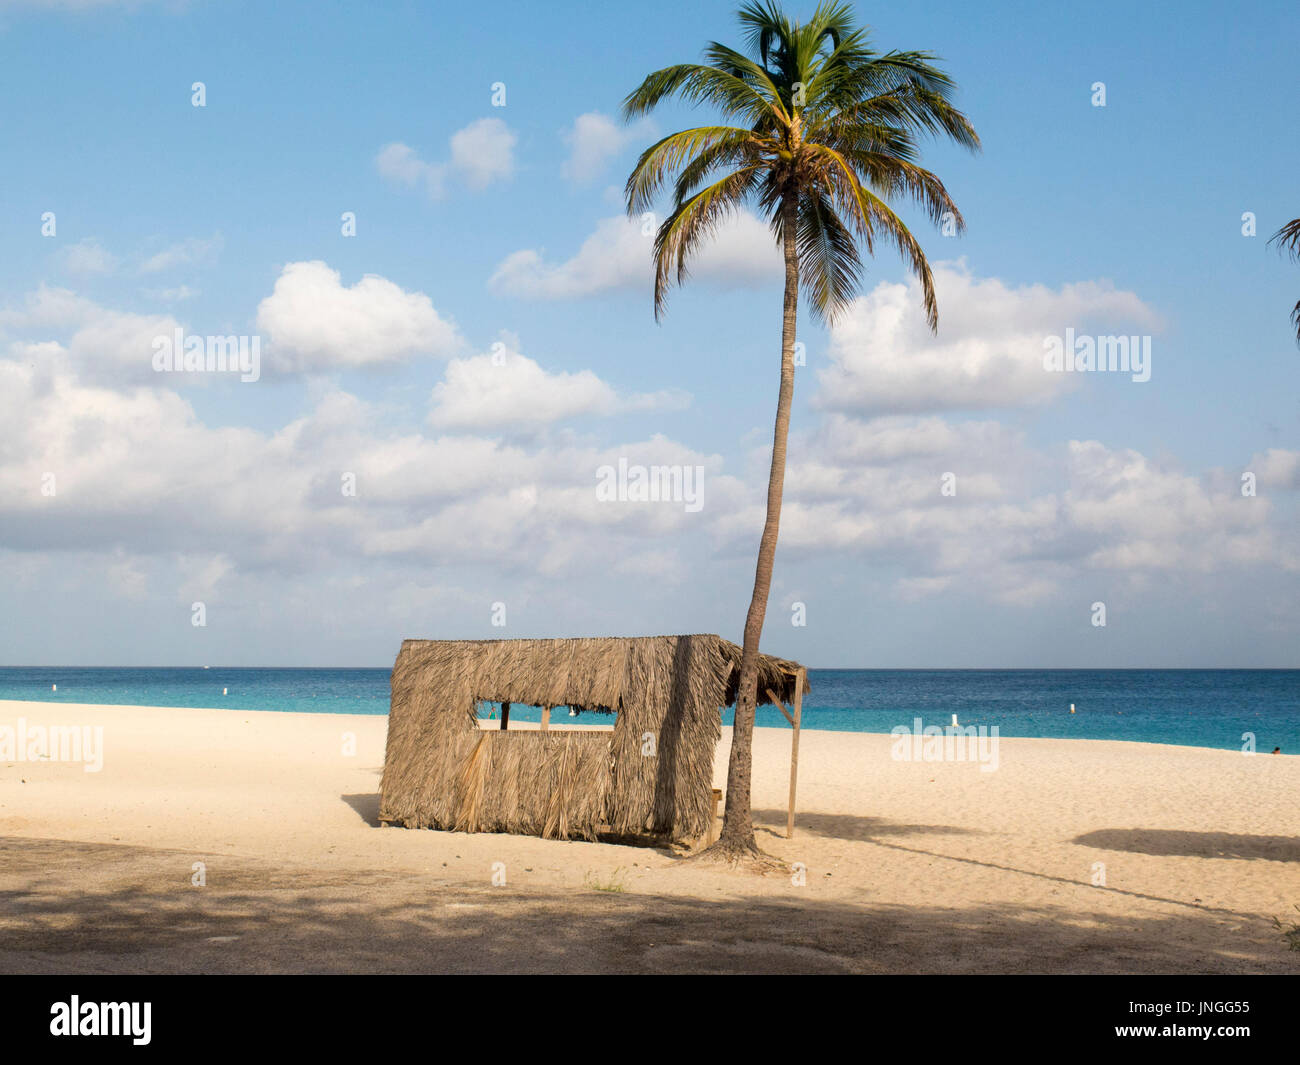 Shelter and palm tree on beach Stock Photo